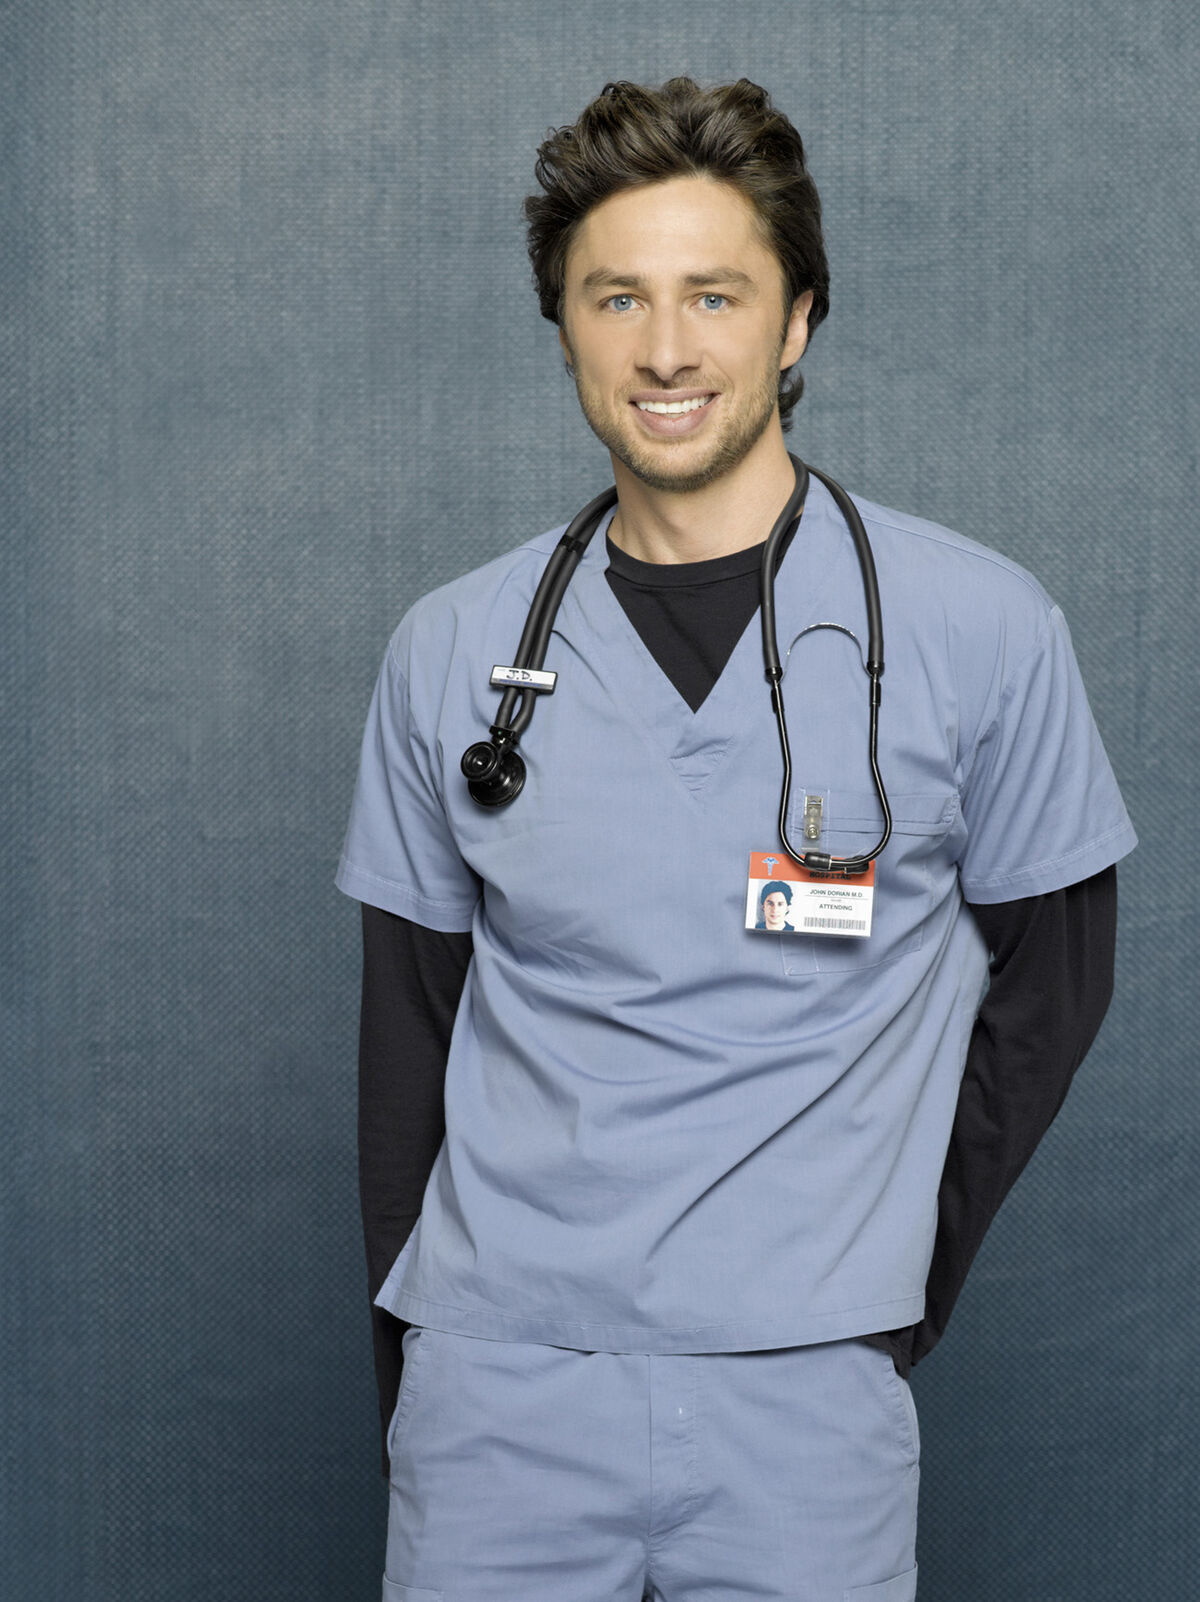 Scrubs. What a show., by George Creasy